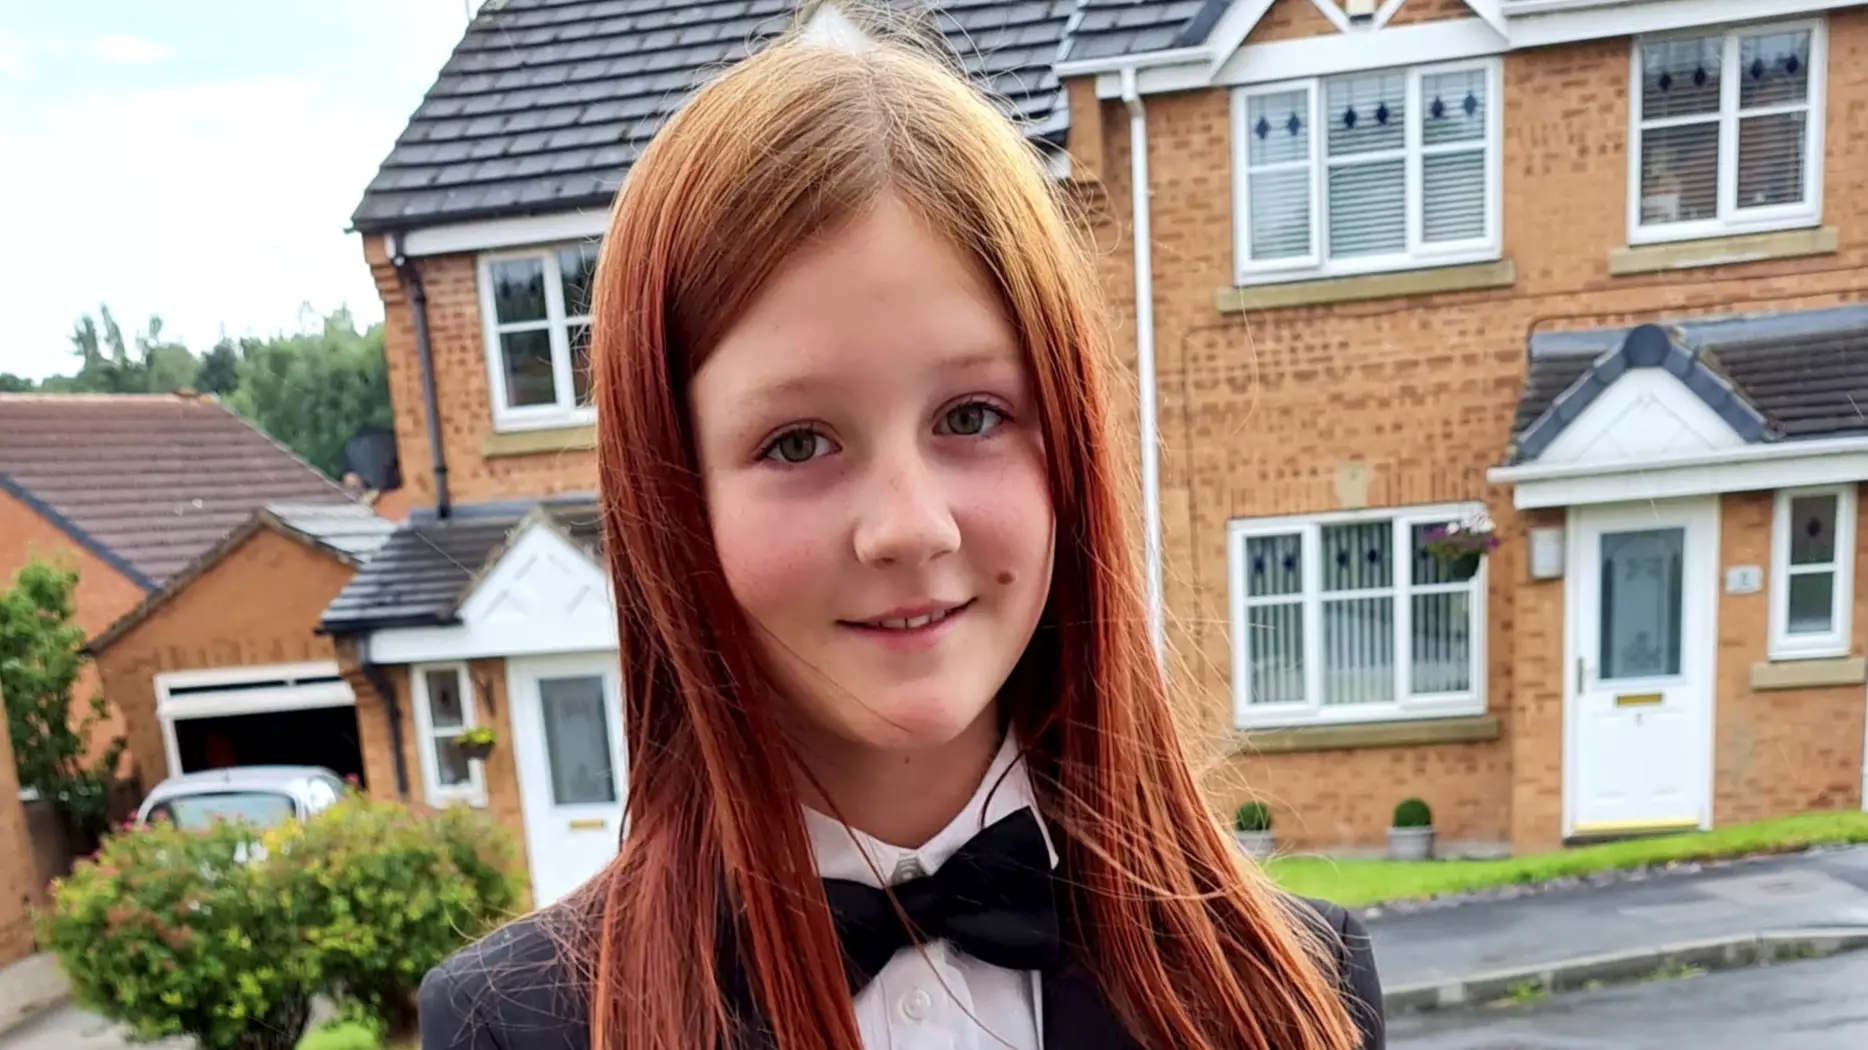 Girl, 11, Left In Tears After 'Cruel' Parents Laugh At Her For Wearing Suit